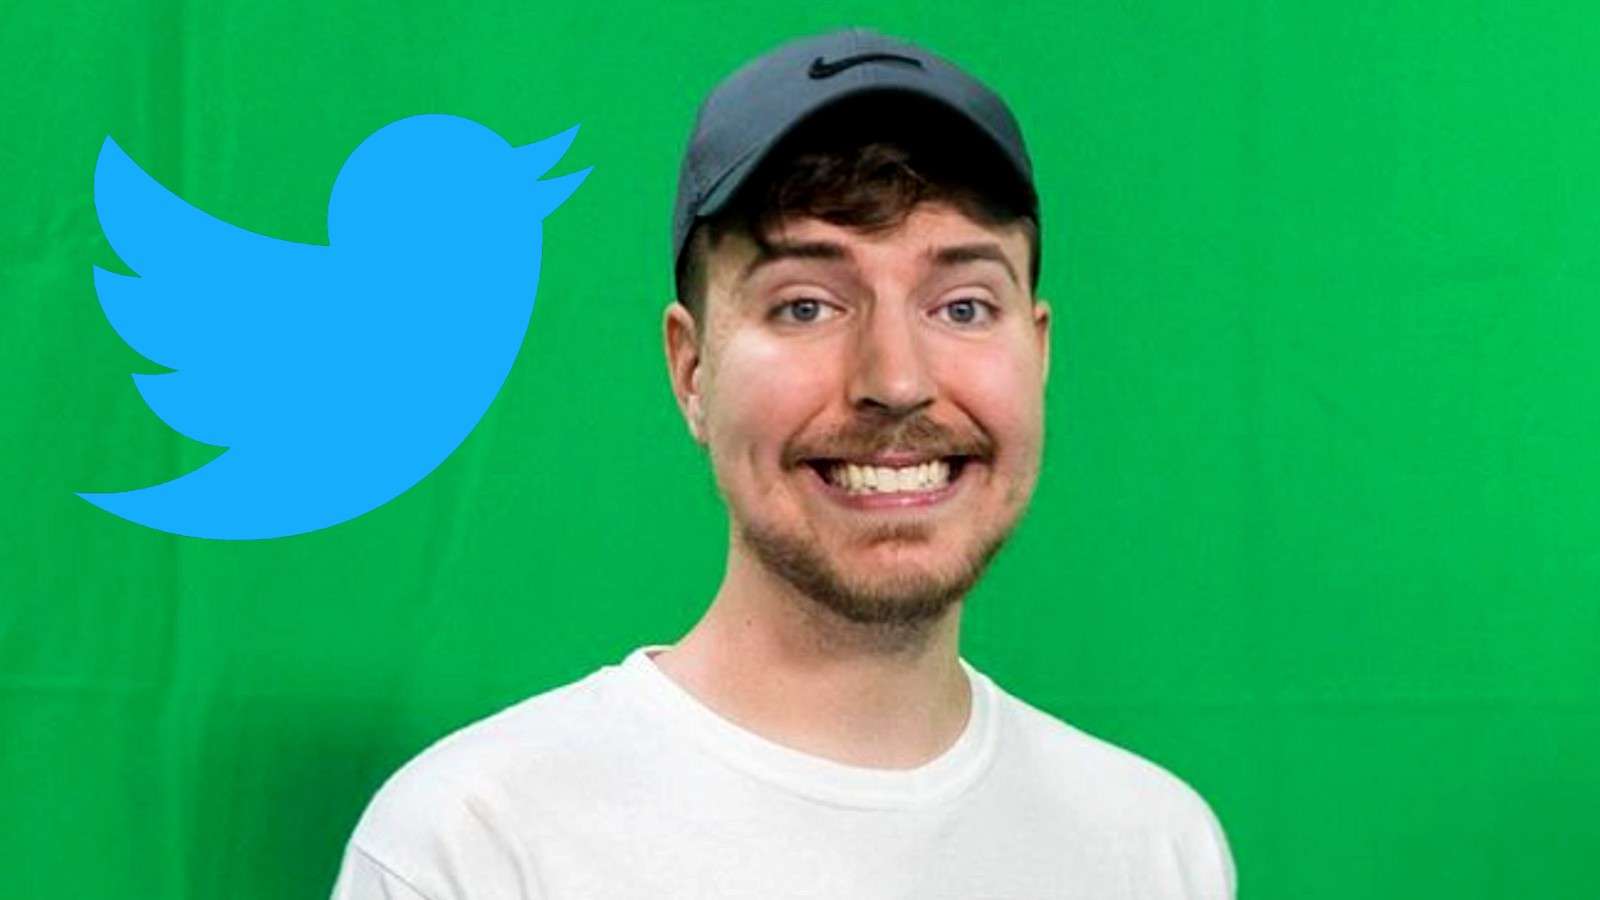 Mr Beast in front of a green screen next to the Twitter logo